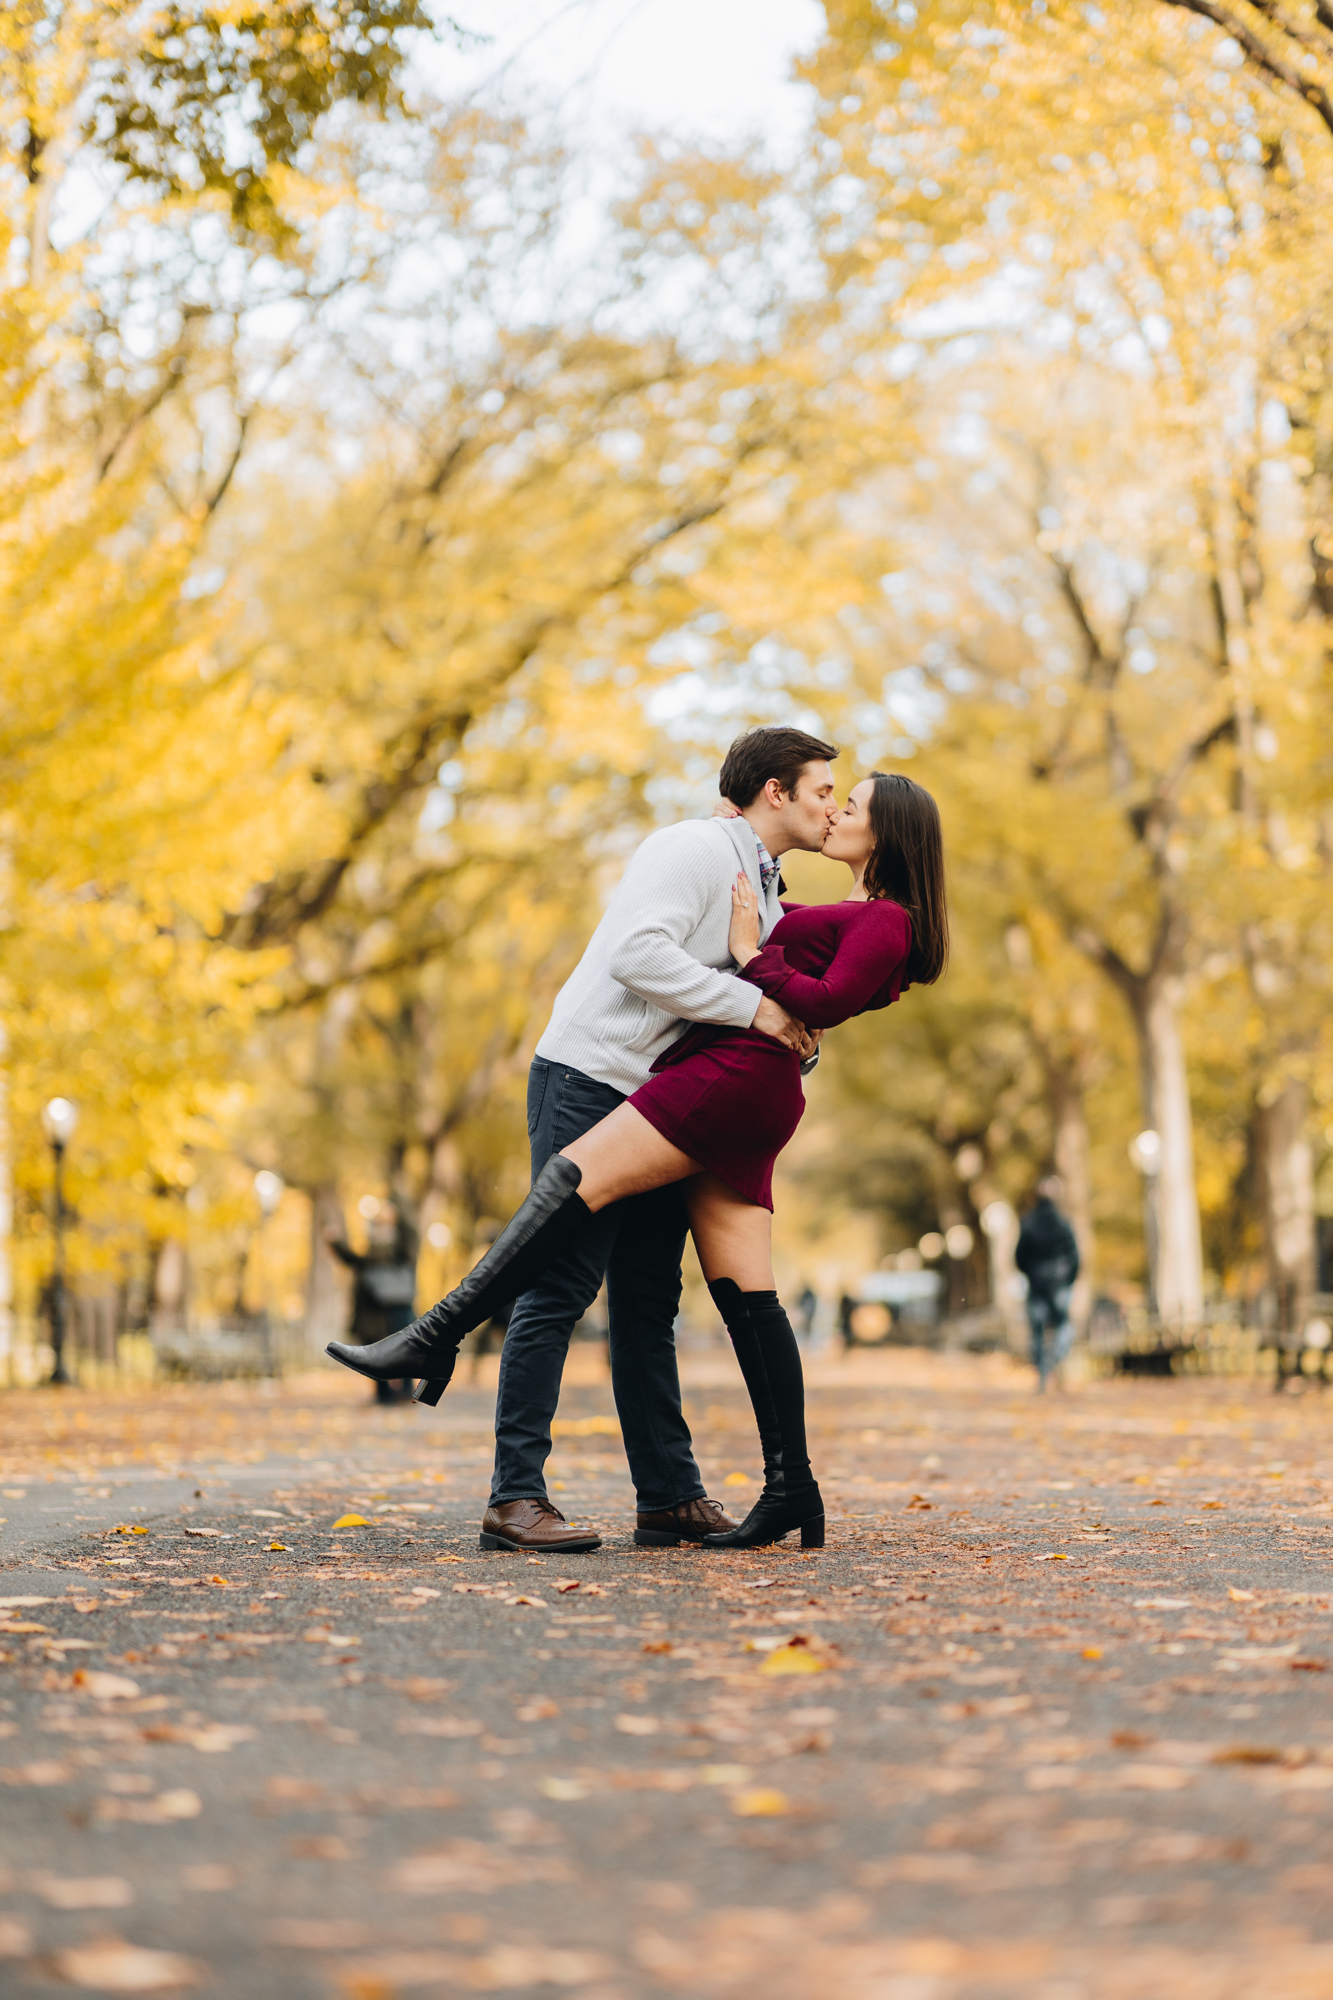 Colorful Fall Engagement Photos in Central Park New York